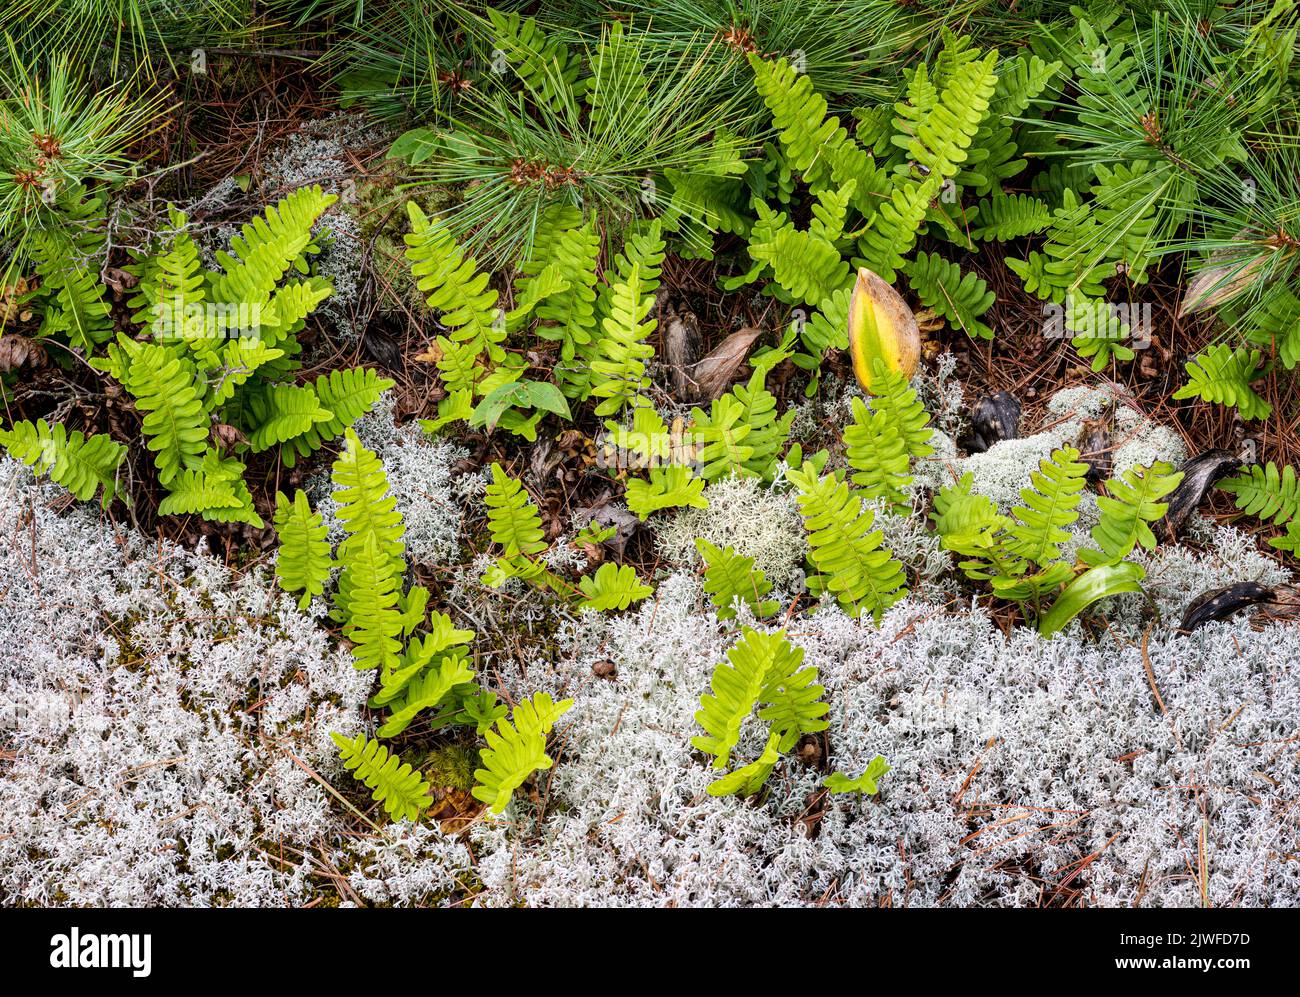 Bed of reindeer lichen, common polypody ferns, Canada mayflower leaves, and white pine branches on island in the 30,000 island region of the Georgian Stock Photo